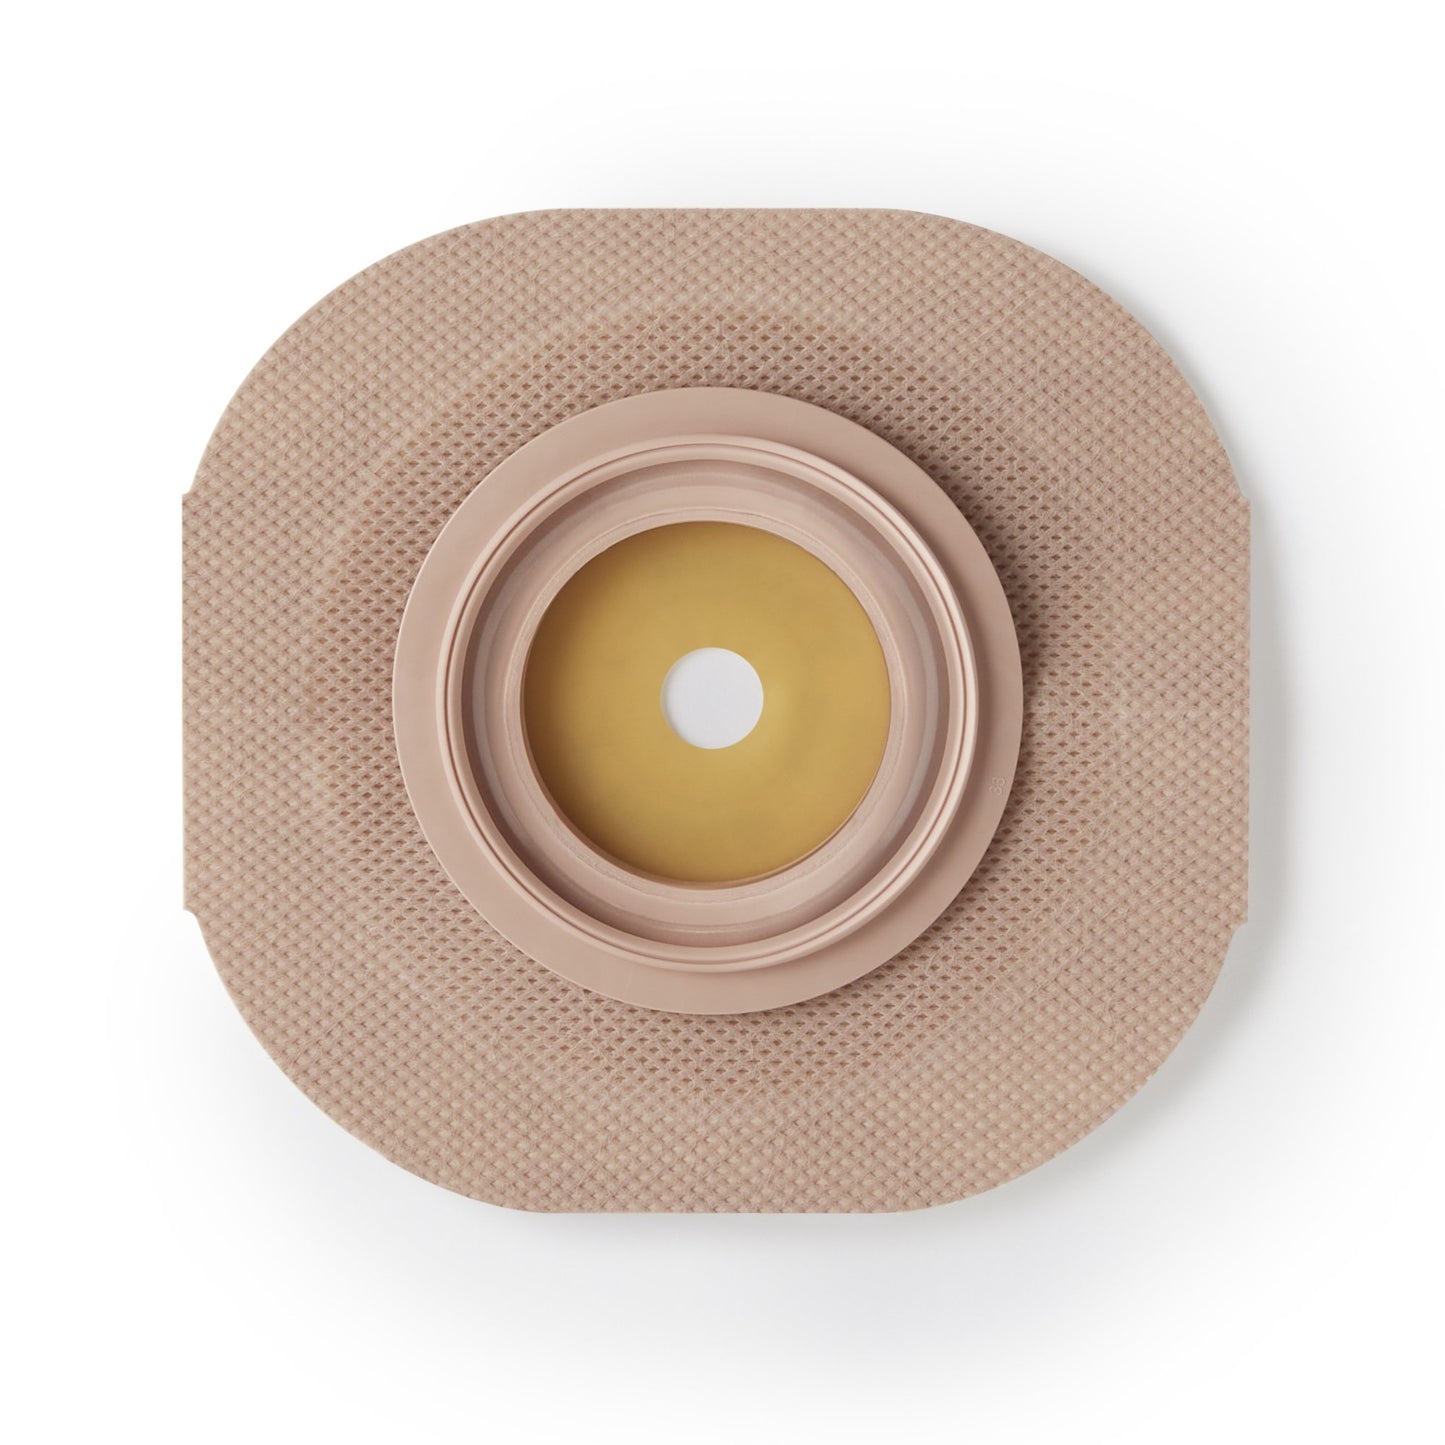 New Image Convex FlexWear™ Colostomy Skin Barrier With Up to 1.5 " Stoma Opening